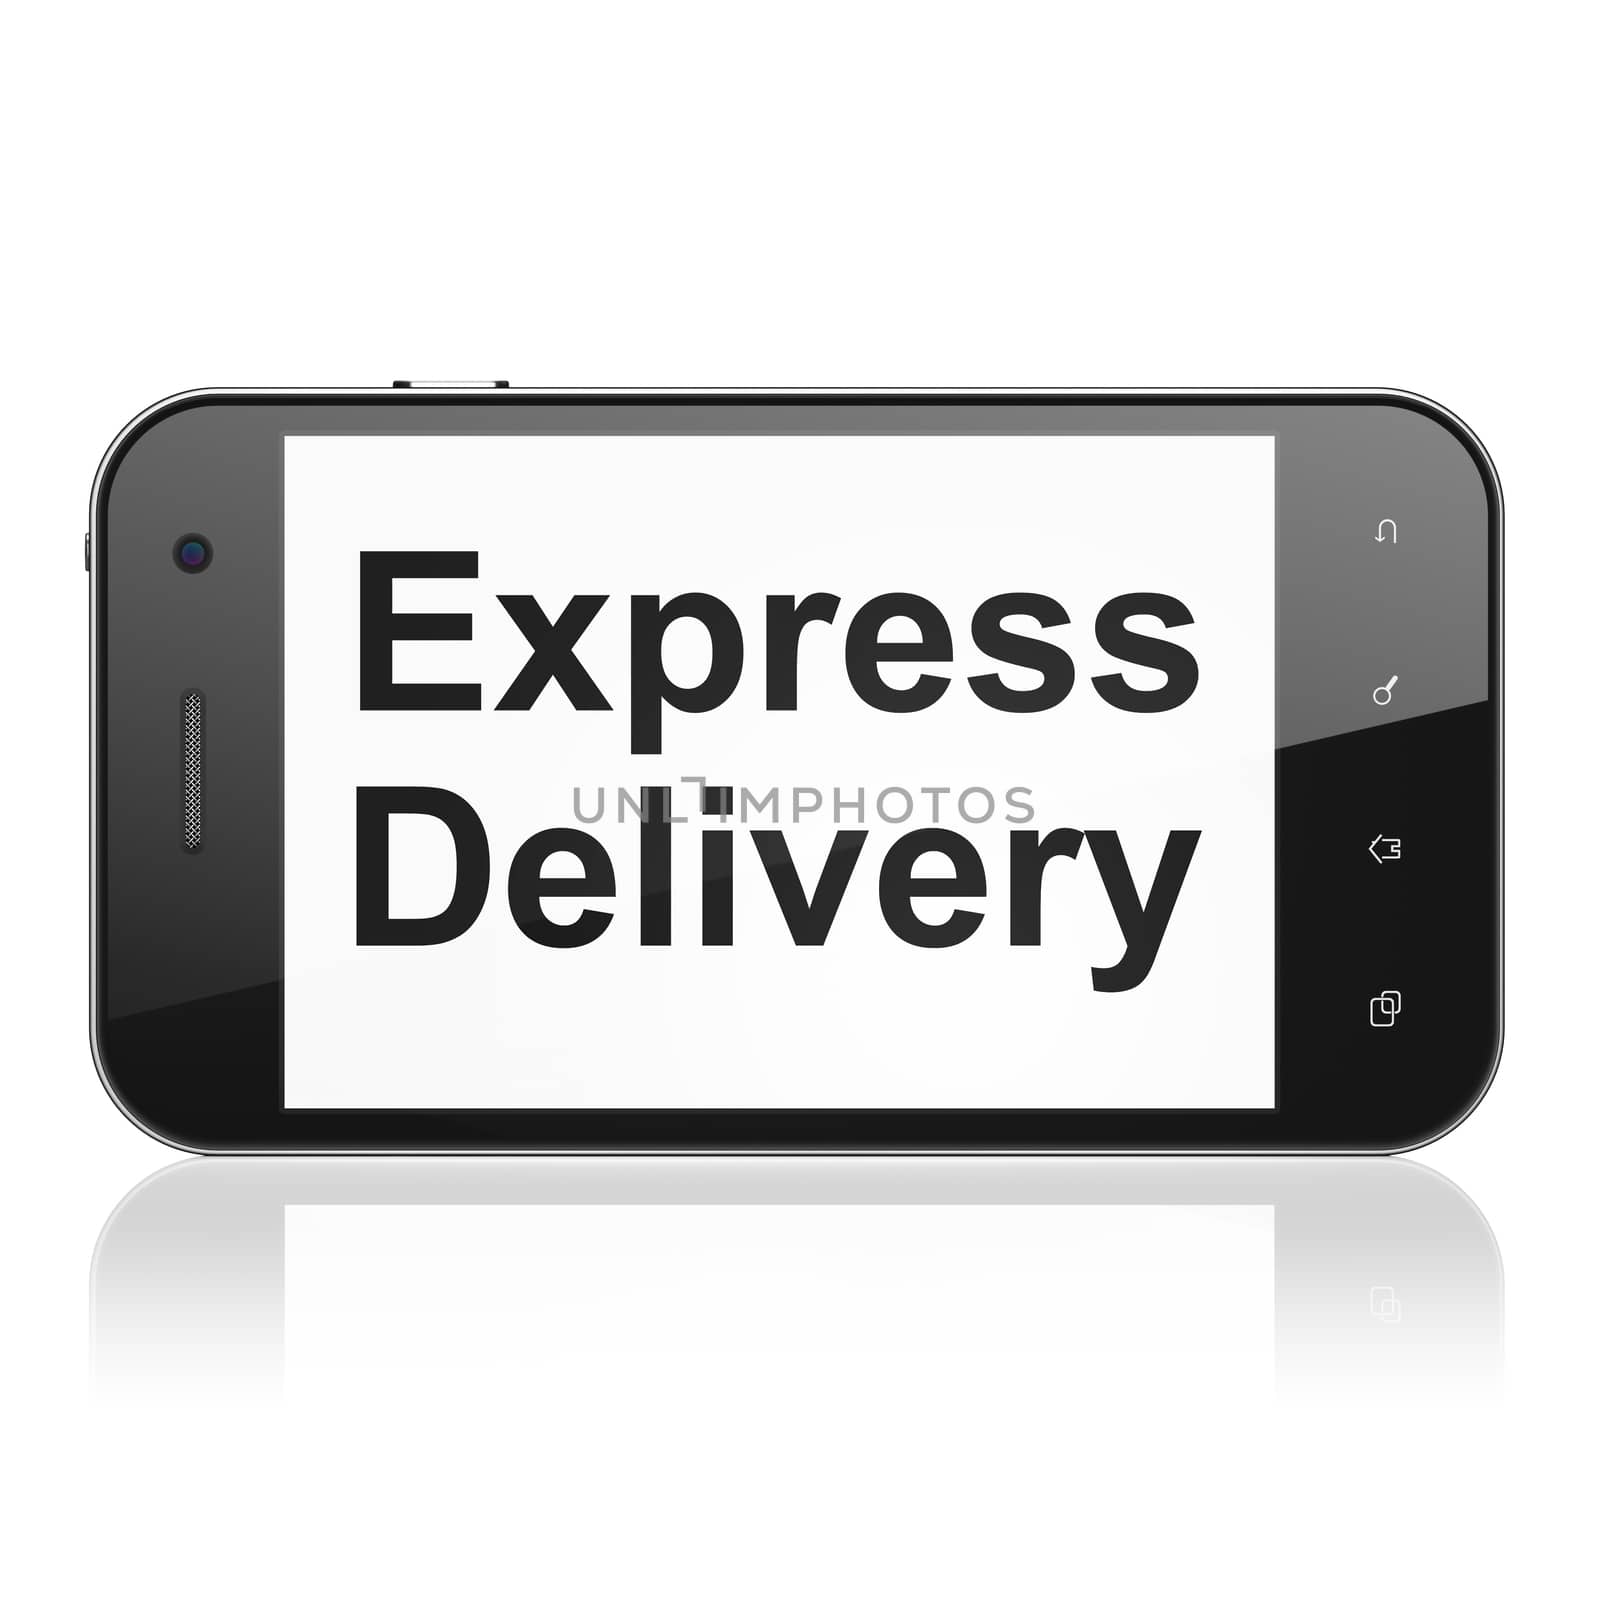 Business concept: Express Delivery on smartphone by maxkabakov